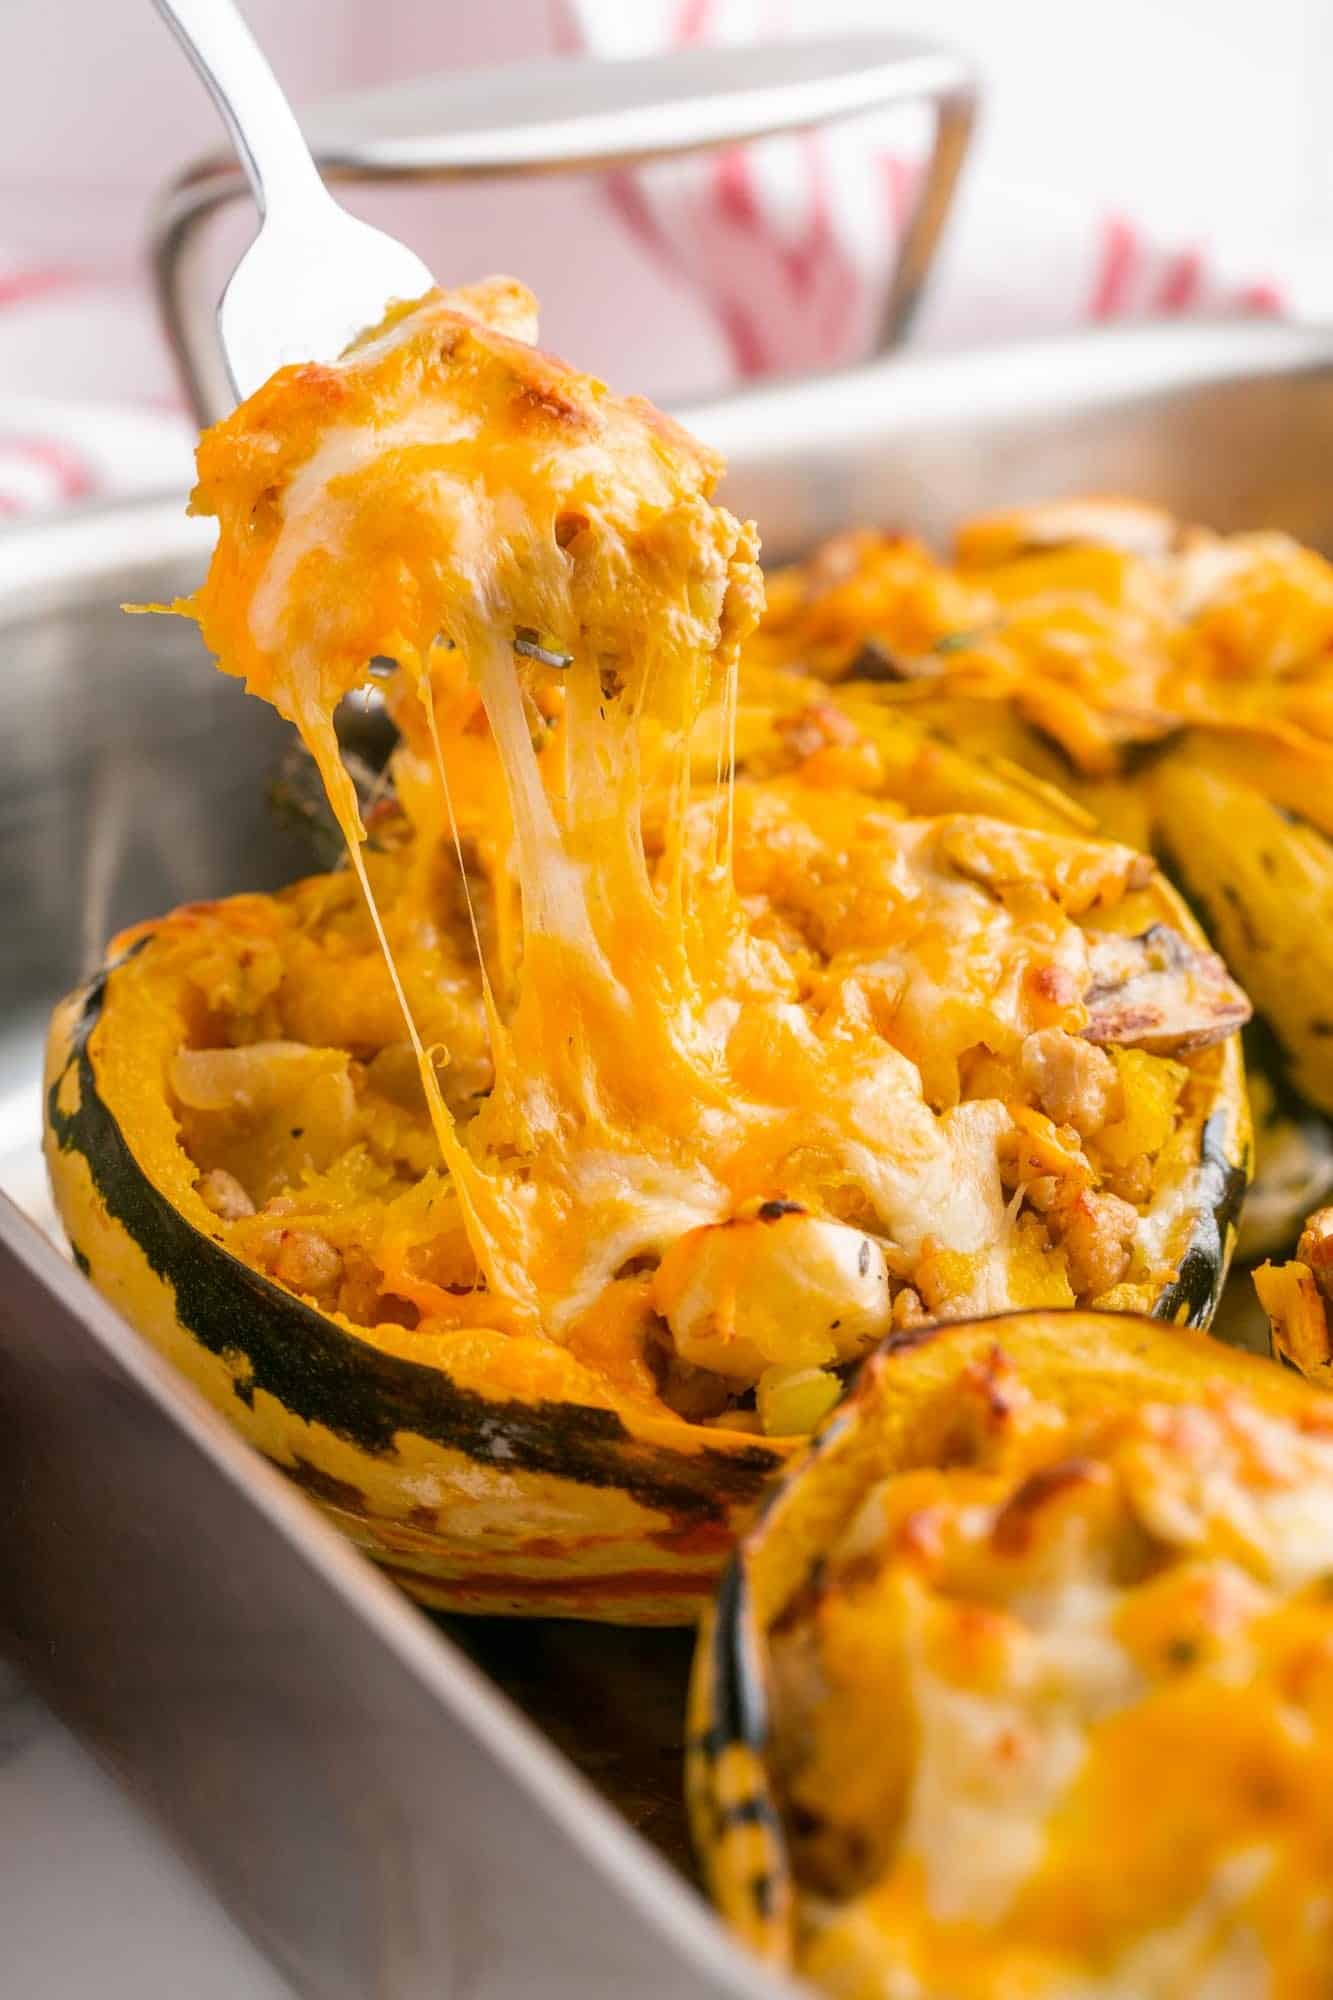 A cheese pull of a stuffed acorn squash using a spoon